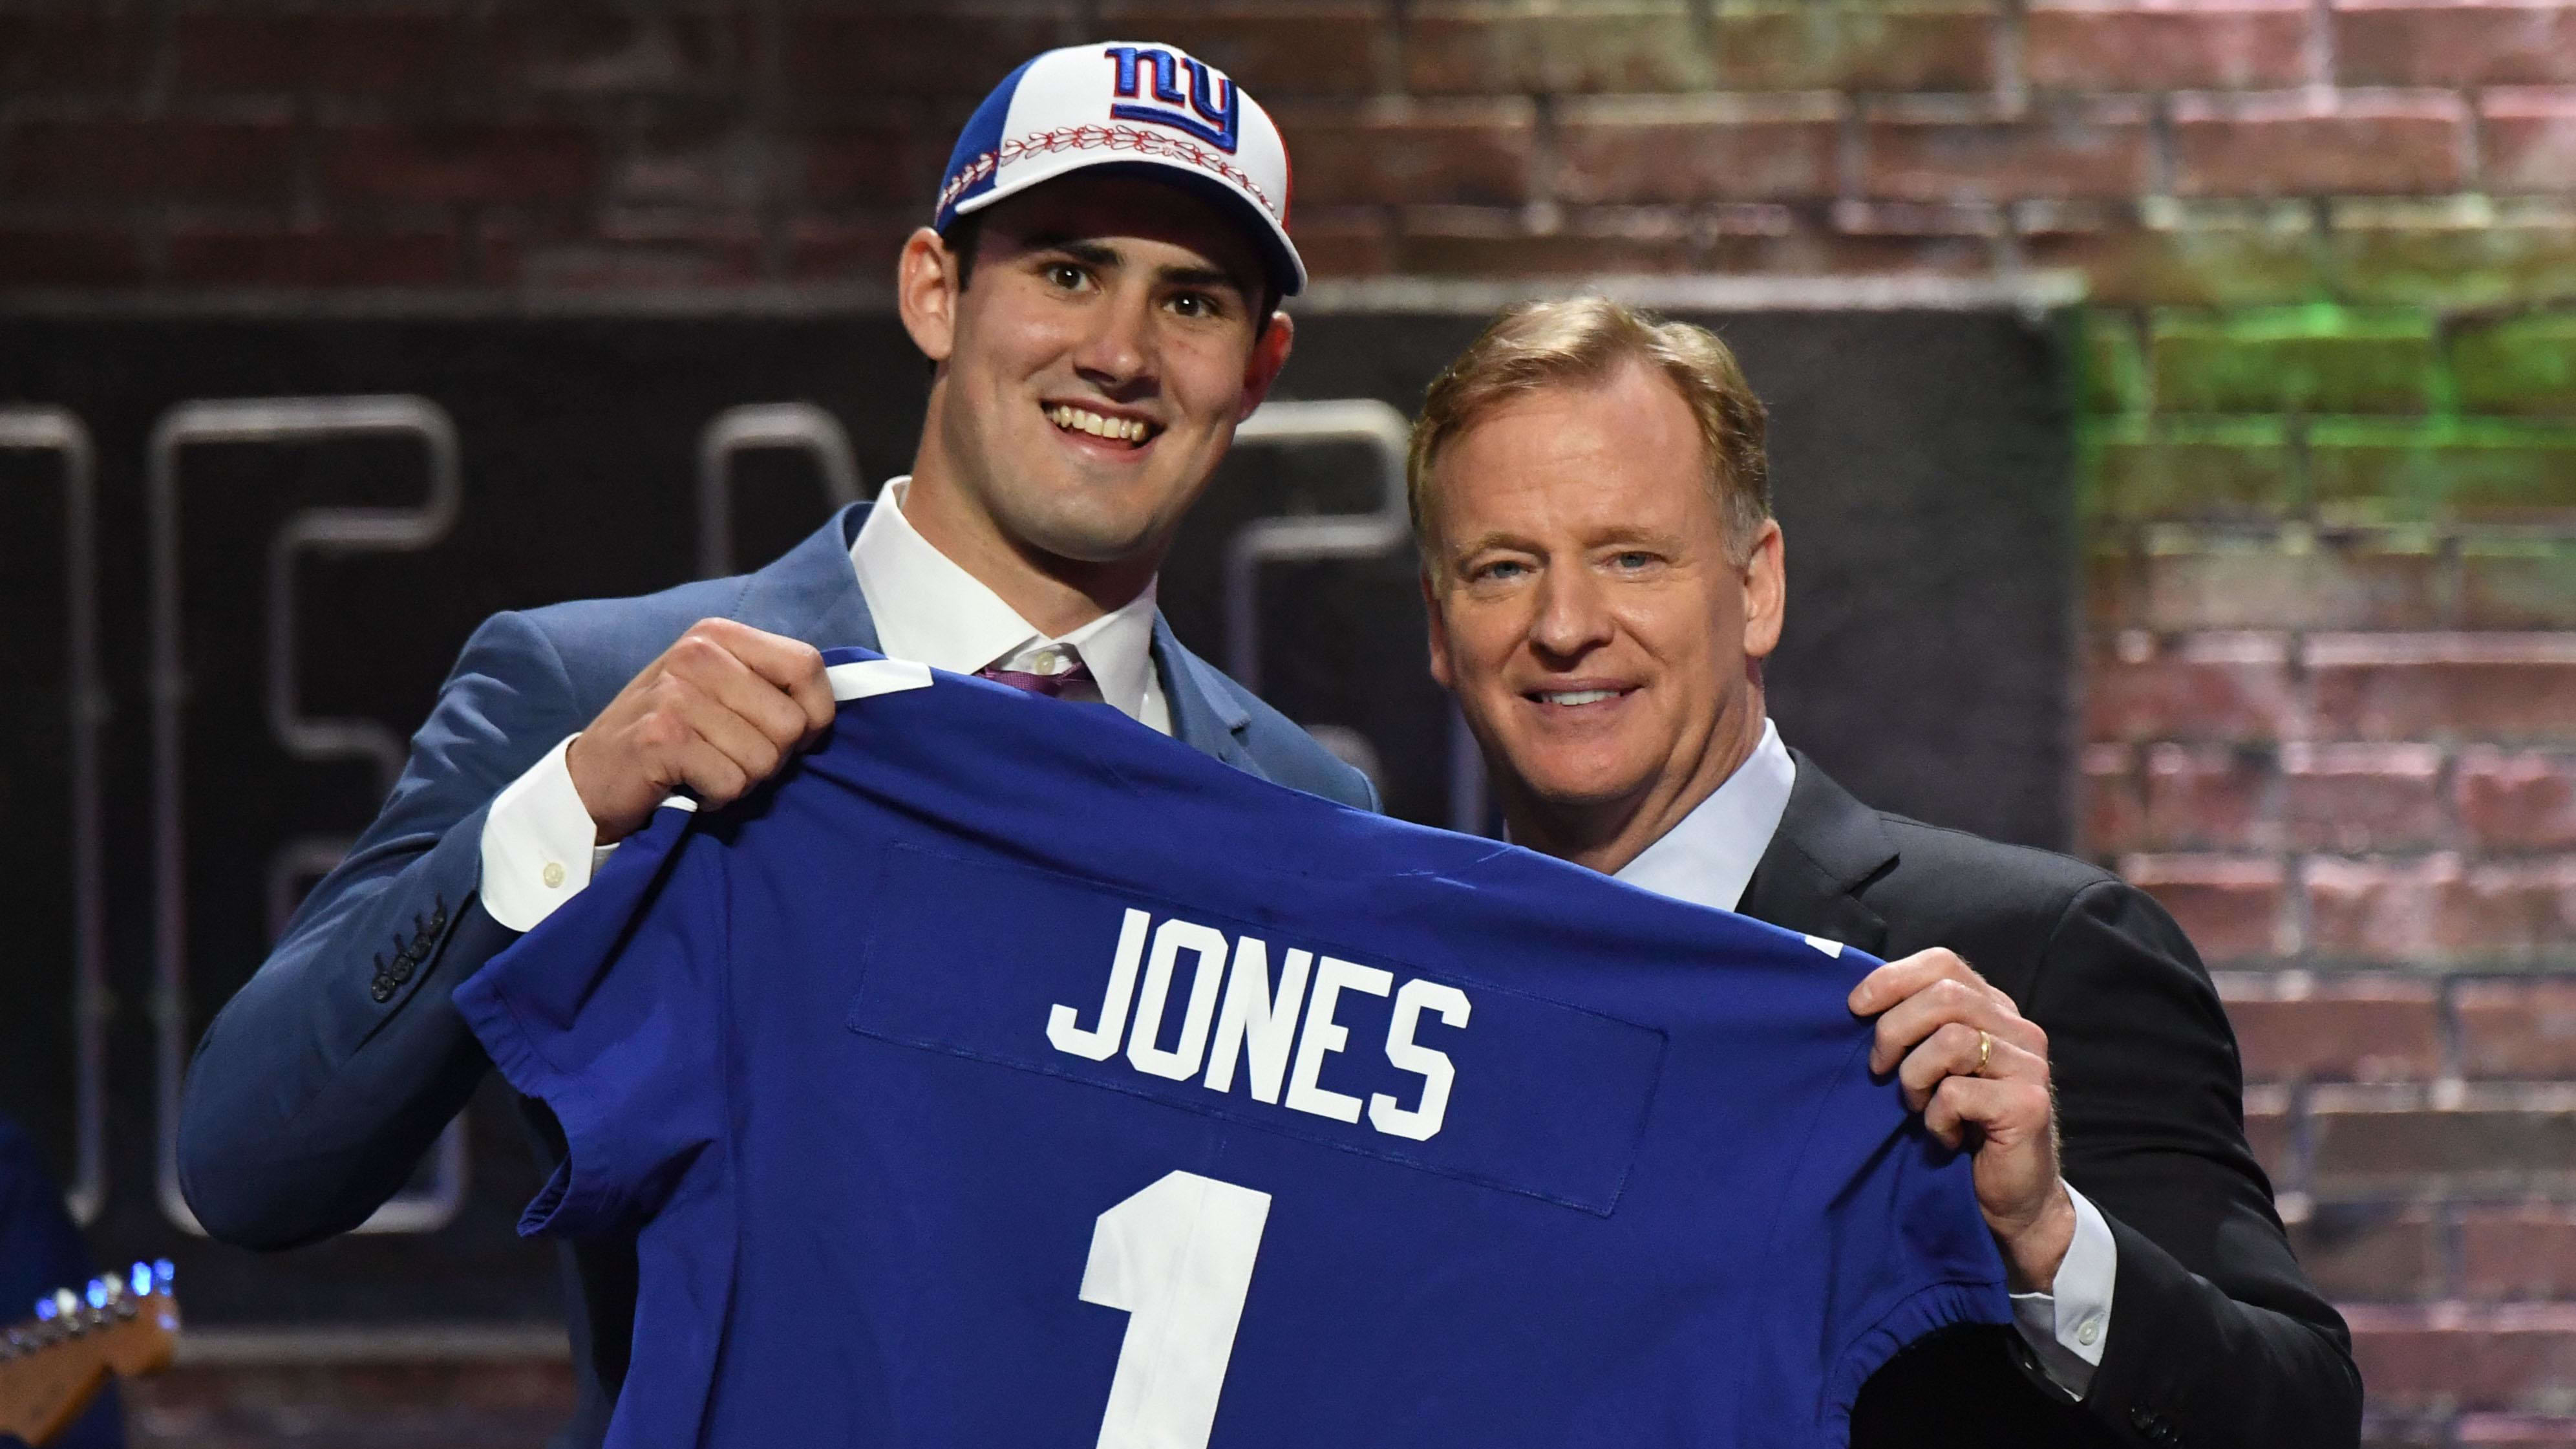 Daniel Jones with Commissioner Roger Goodell after he was selected sixth overall in the 2019 draft 2019.